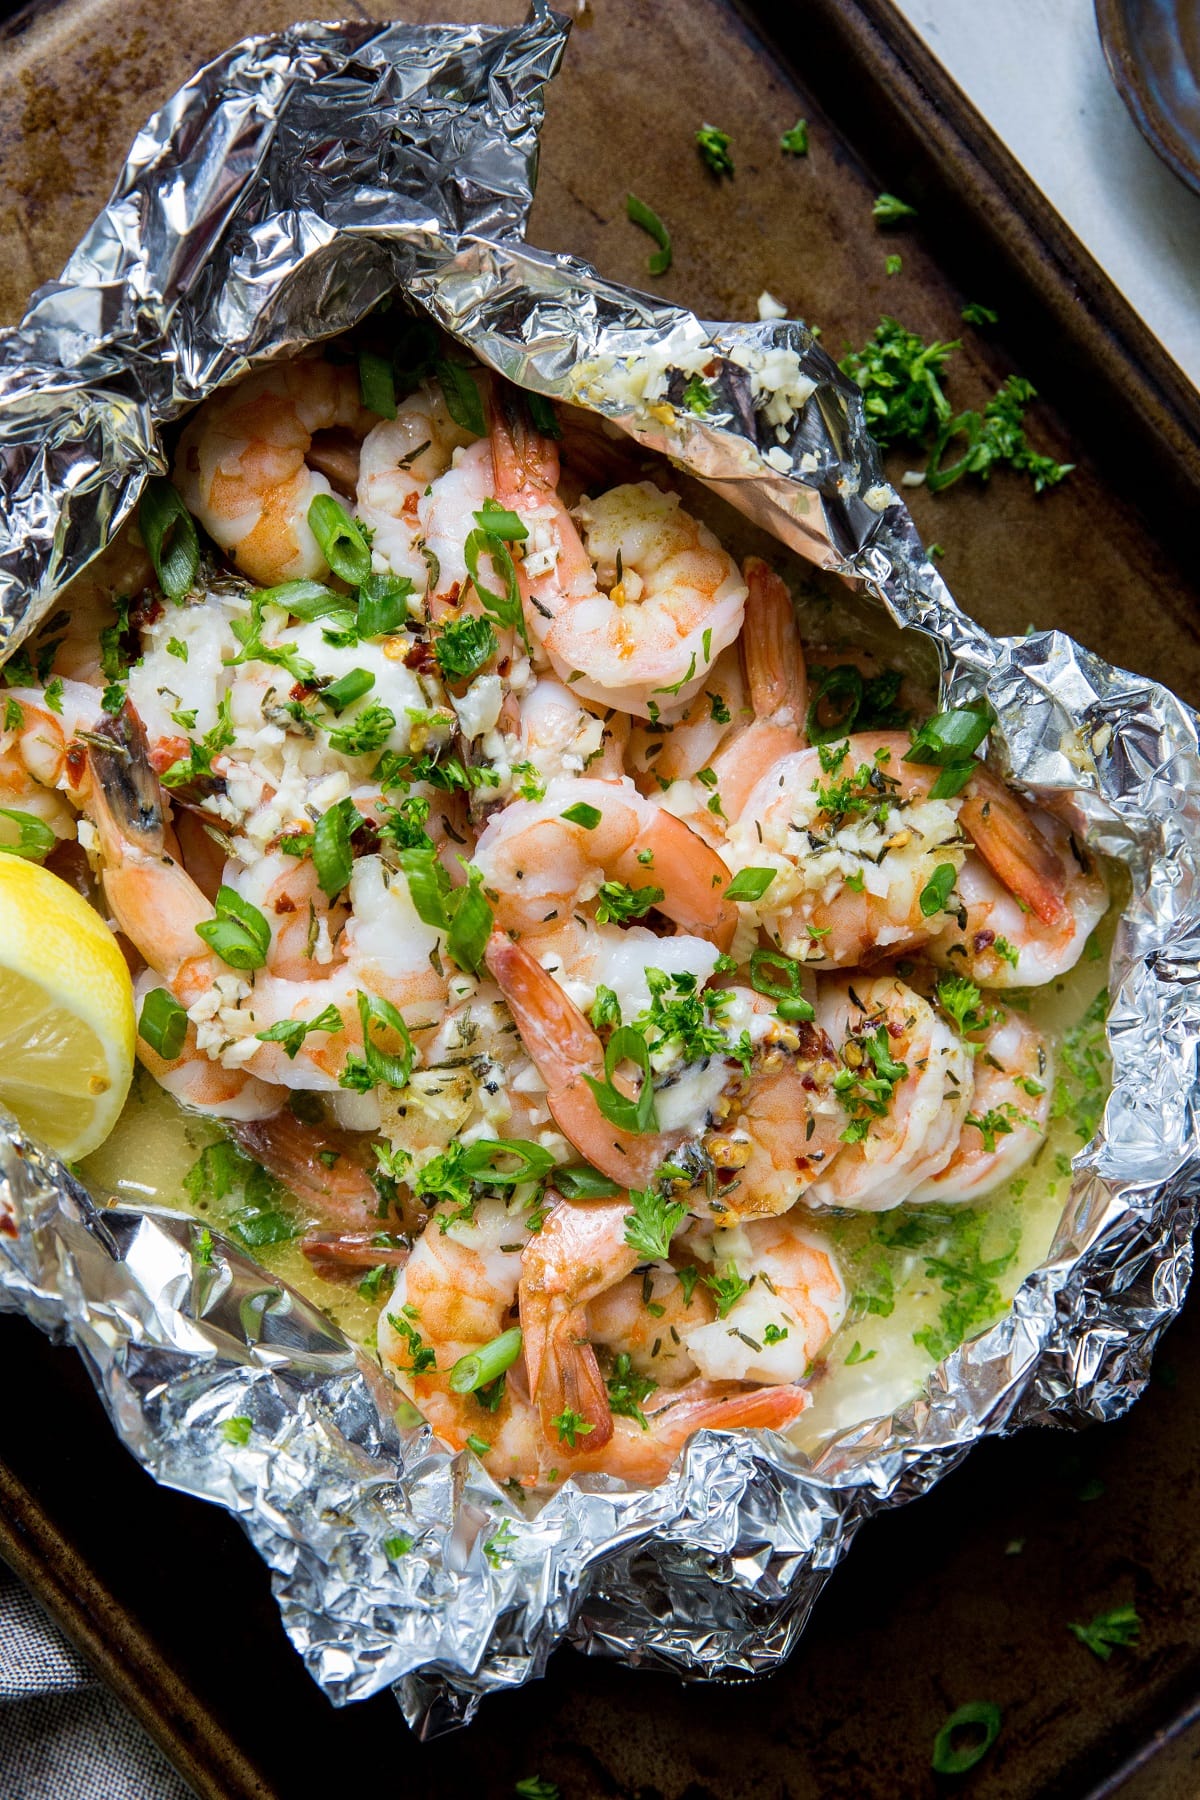 Large sheet of aluminum foil with cooked shrimp and butter, herbs, lemon juice and garlic inside. Freshly cooked.